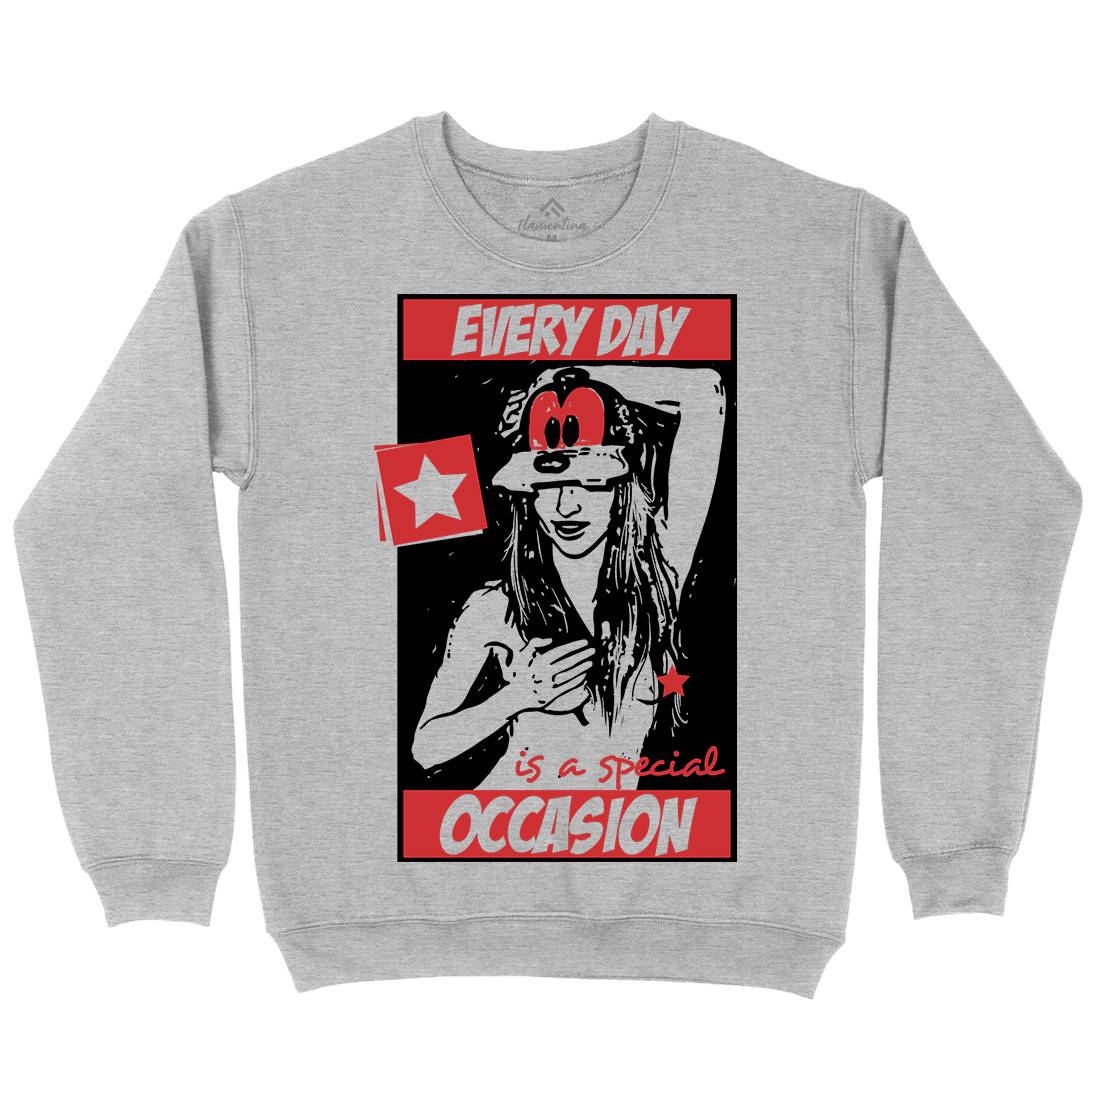 Every Day Is A Special Occasion Kids Crew Neck Sweatshirt Quotes C927